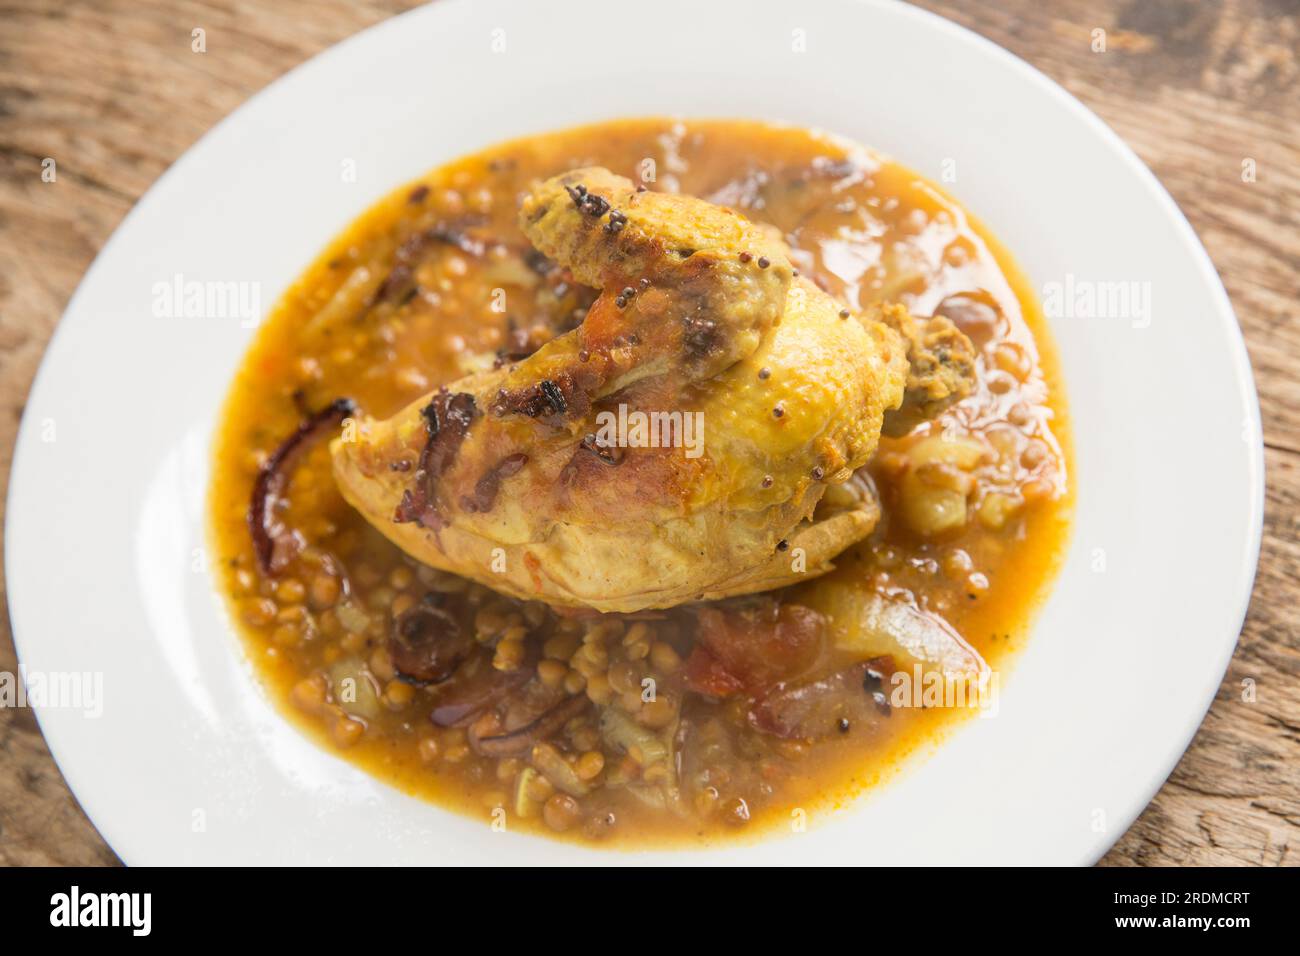 A chicken fillet and wing on the bone that have been homecooked and curried with brown lentils to make a chicken dal. England UK GB Stock Photo